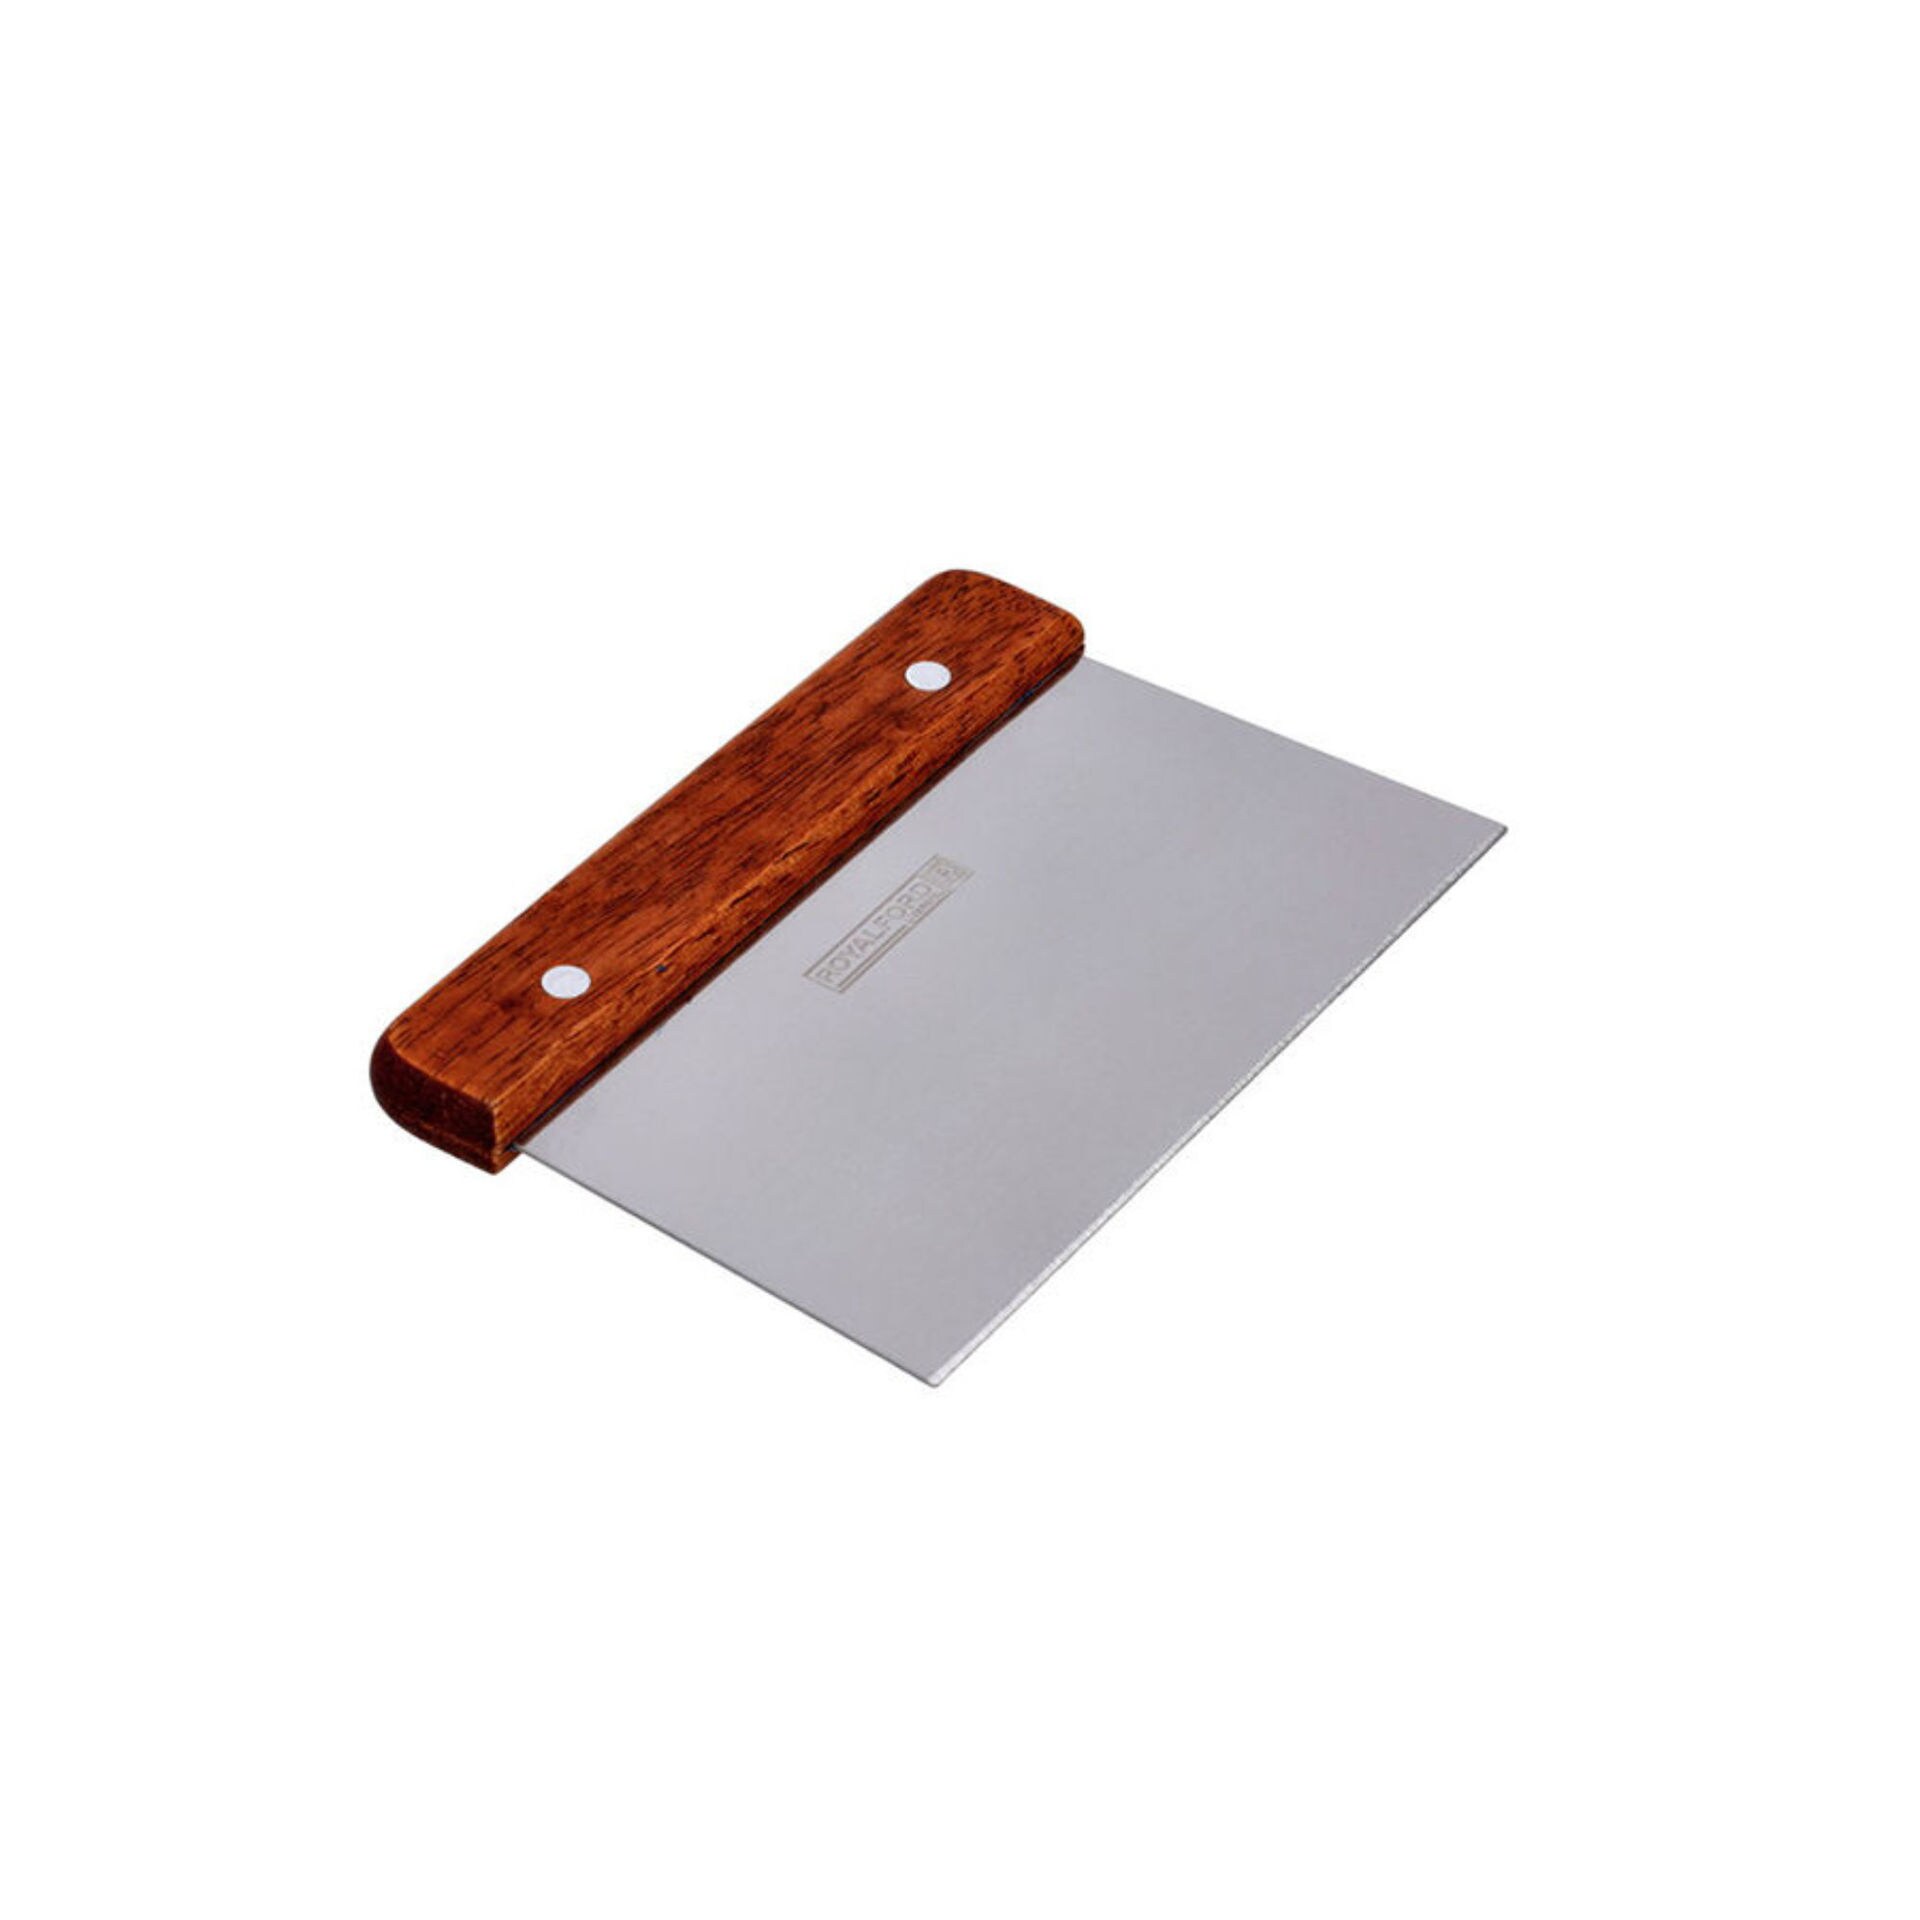 https://assets.dragonmart.ae//pictures/0457226_royalford-stainless-steel-scraper-with-hard-wooden-handle-silver-and-brown.jpeg